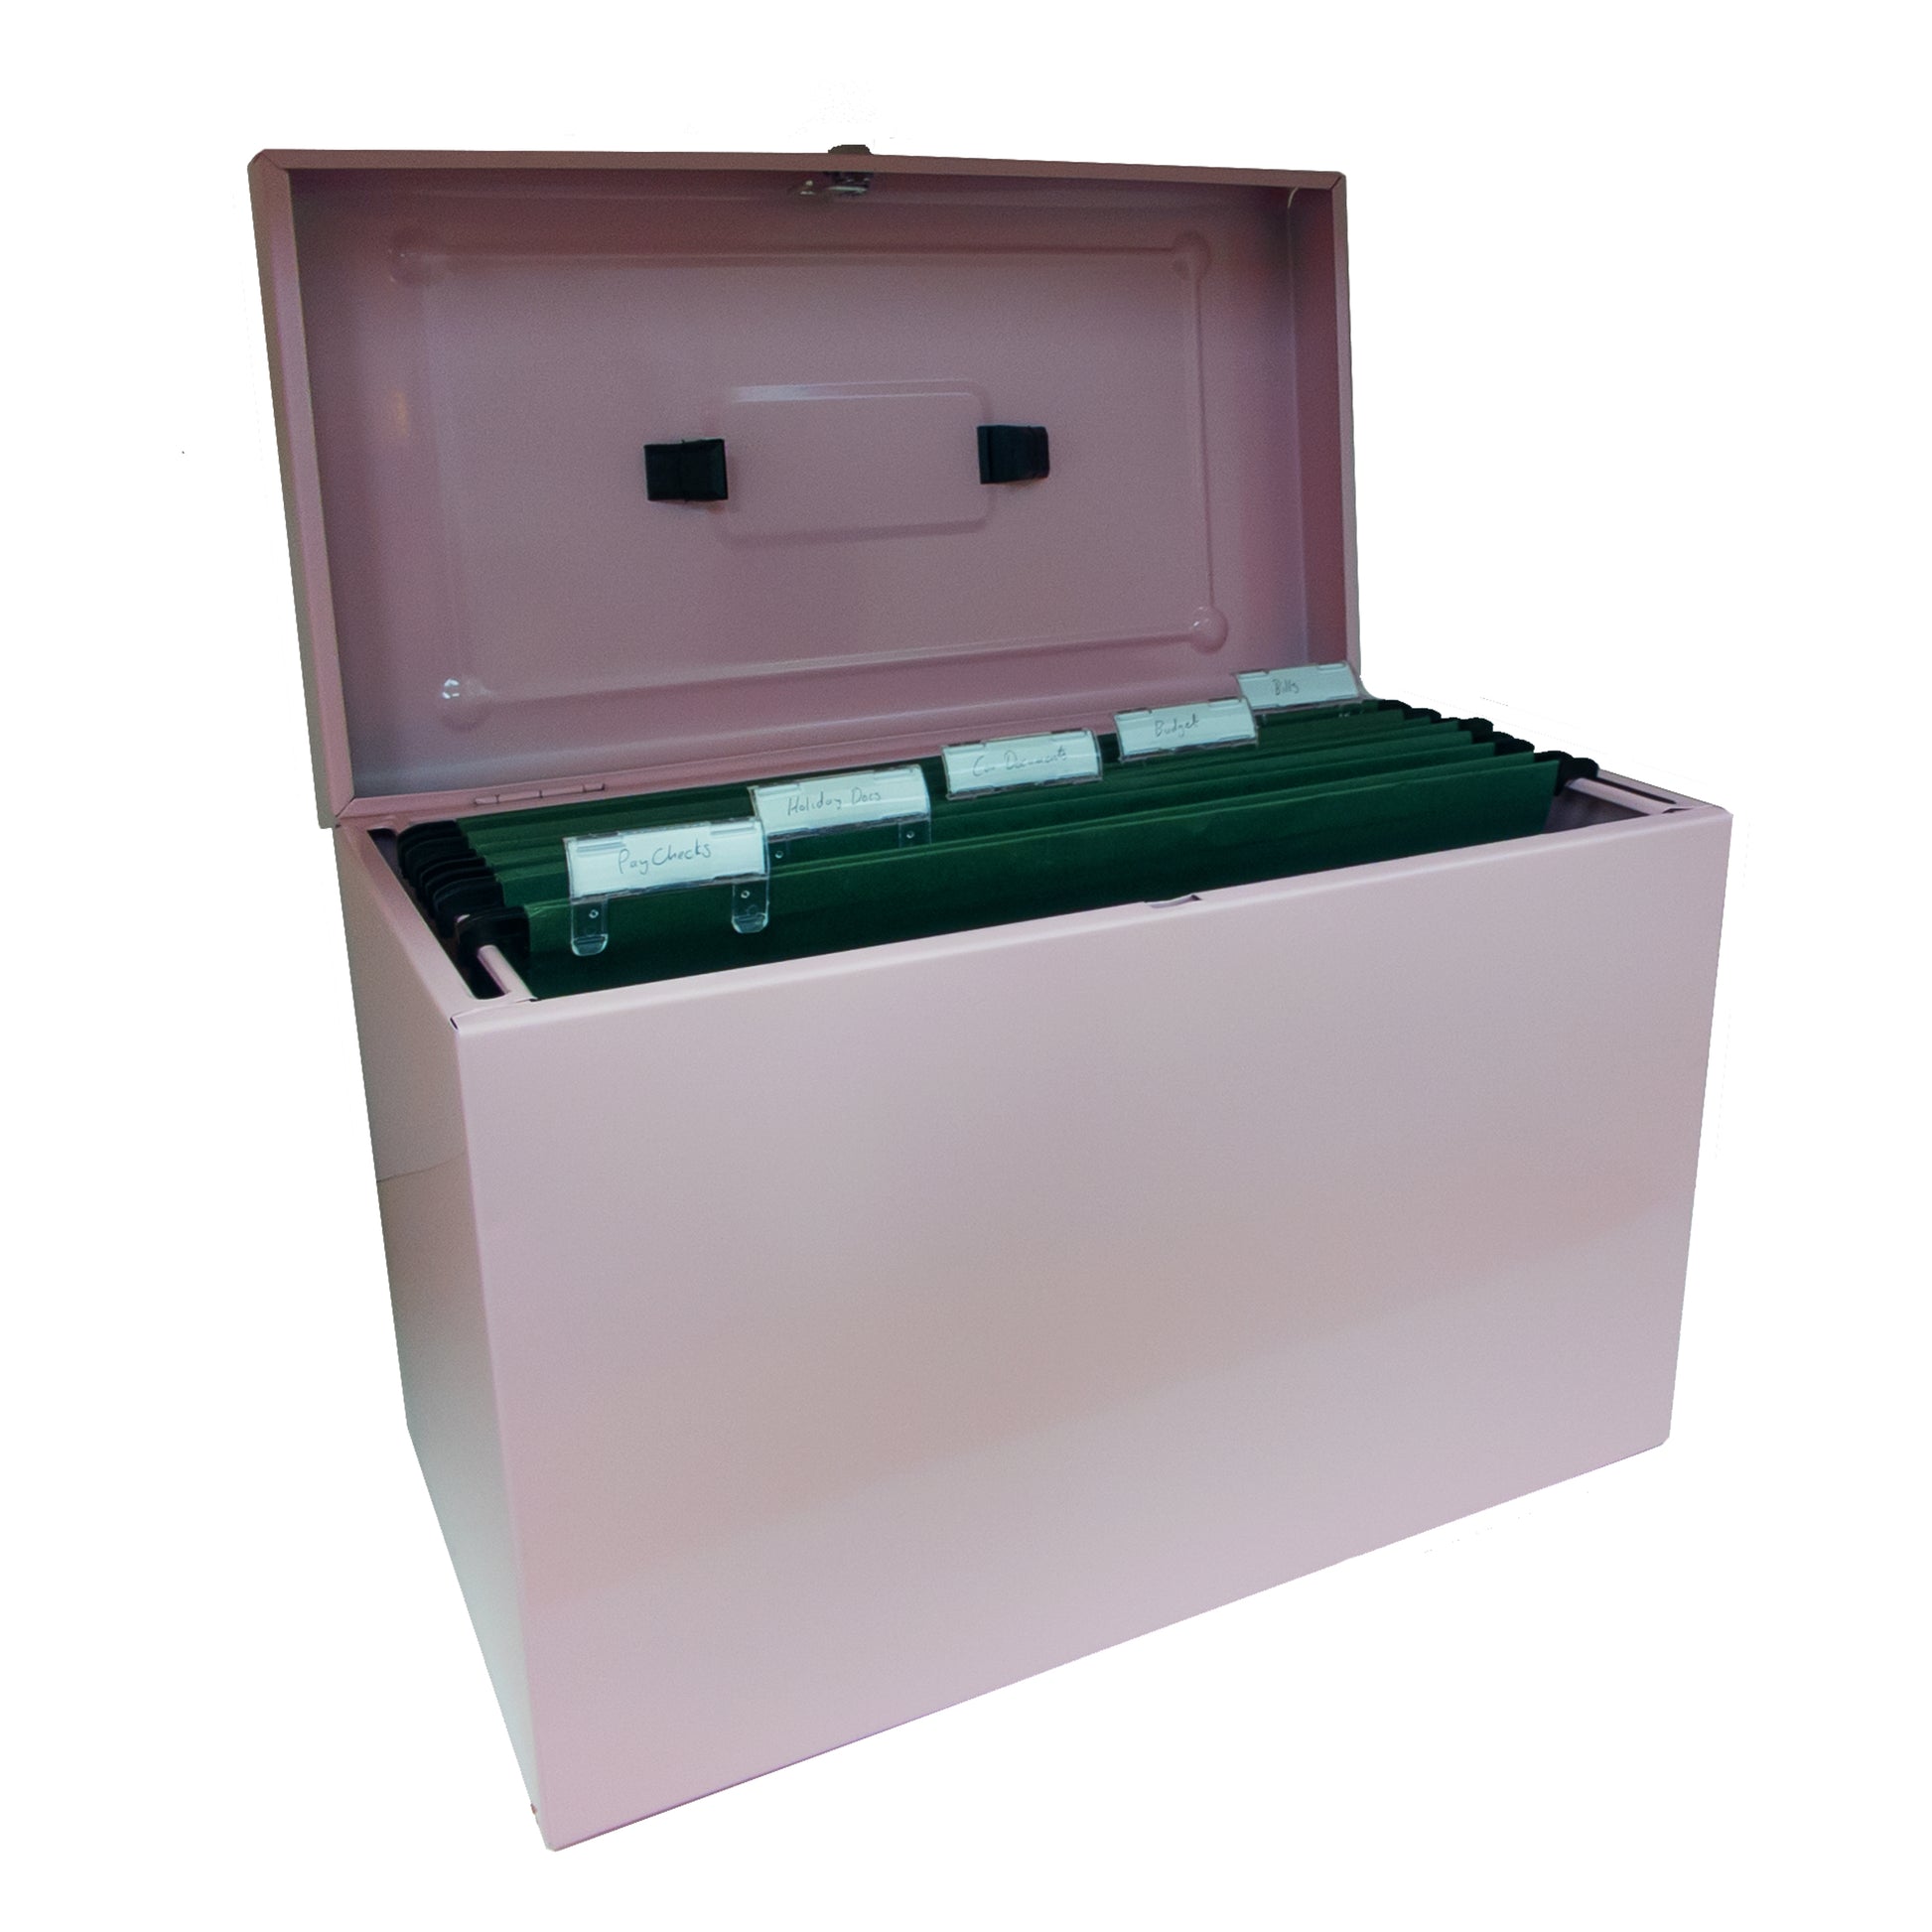 Open pastel pink A4+ (Foolscap) steel home file box with five green suspension files inside, all with handwritten labels including 'Bills', 'Budget', 'Current Year', and others demonstrating organized document storage. 